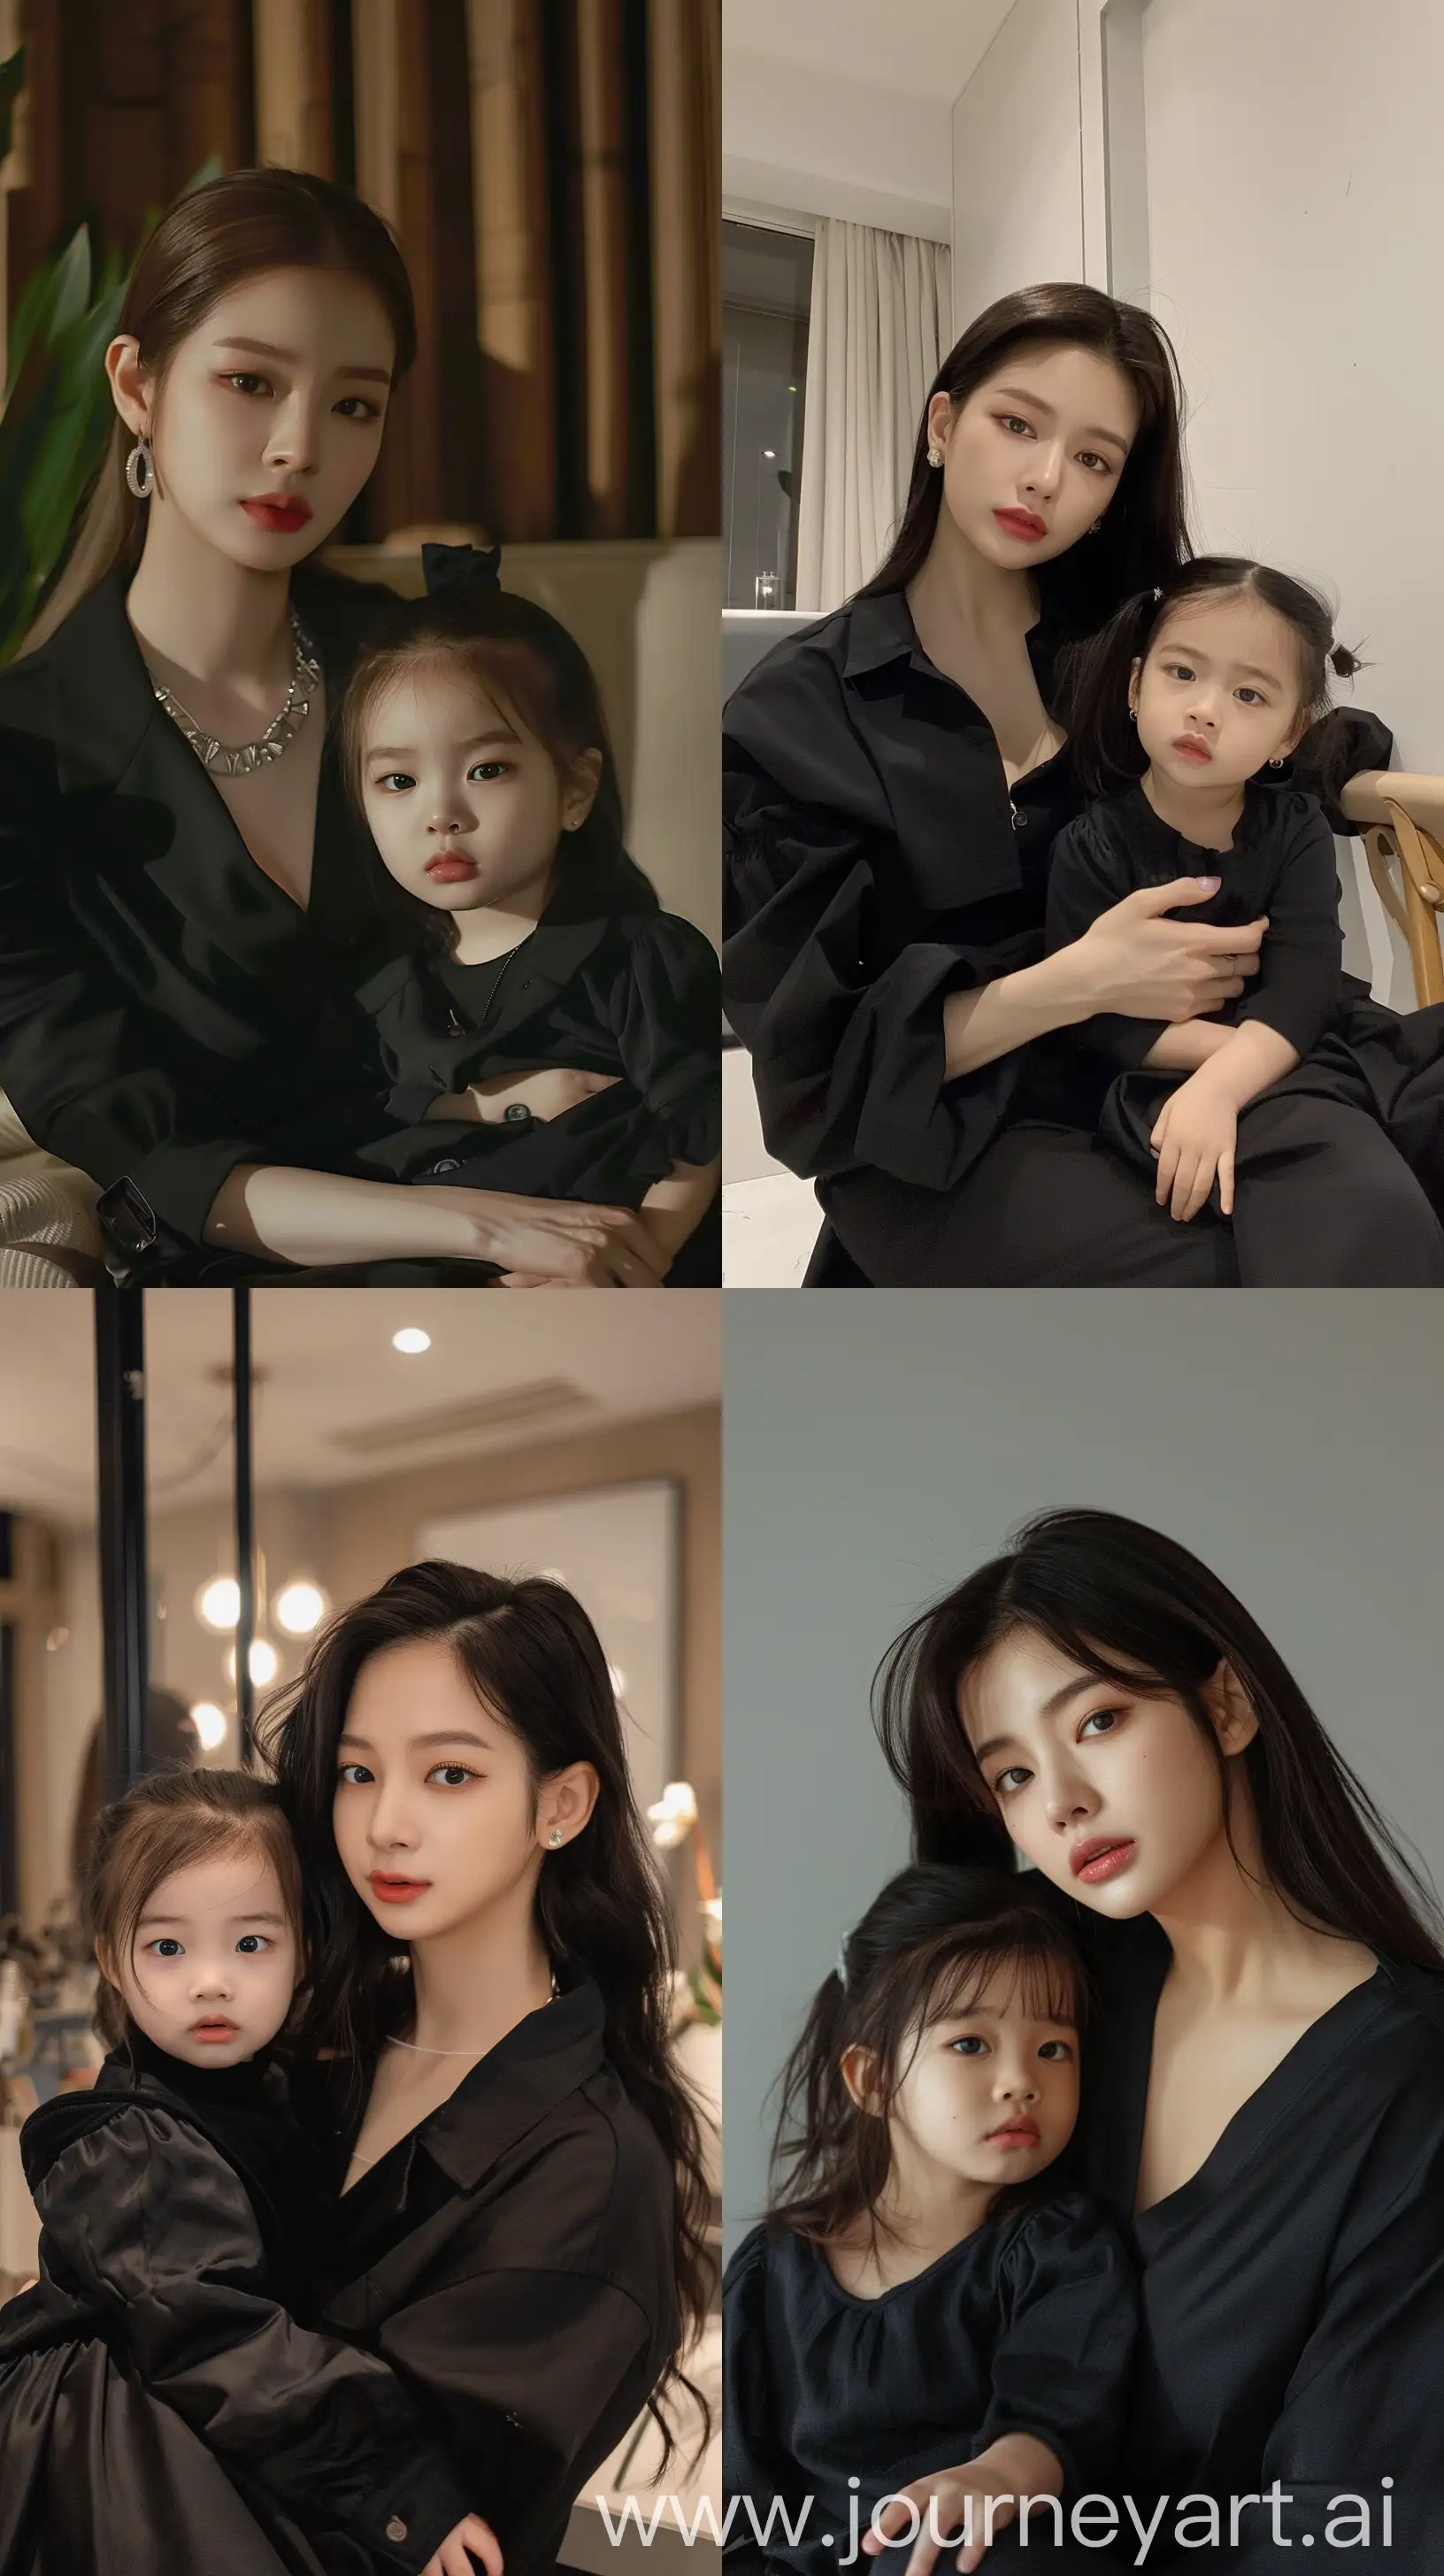 Stylish-Nighttime-Portrait-Jennie-from-Blackpink-Poses-with-Her-Adorable-Daughter